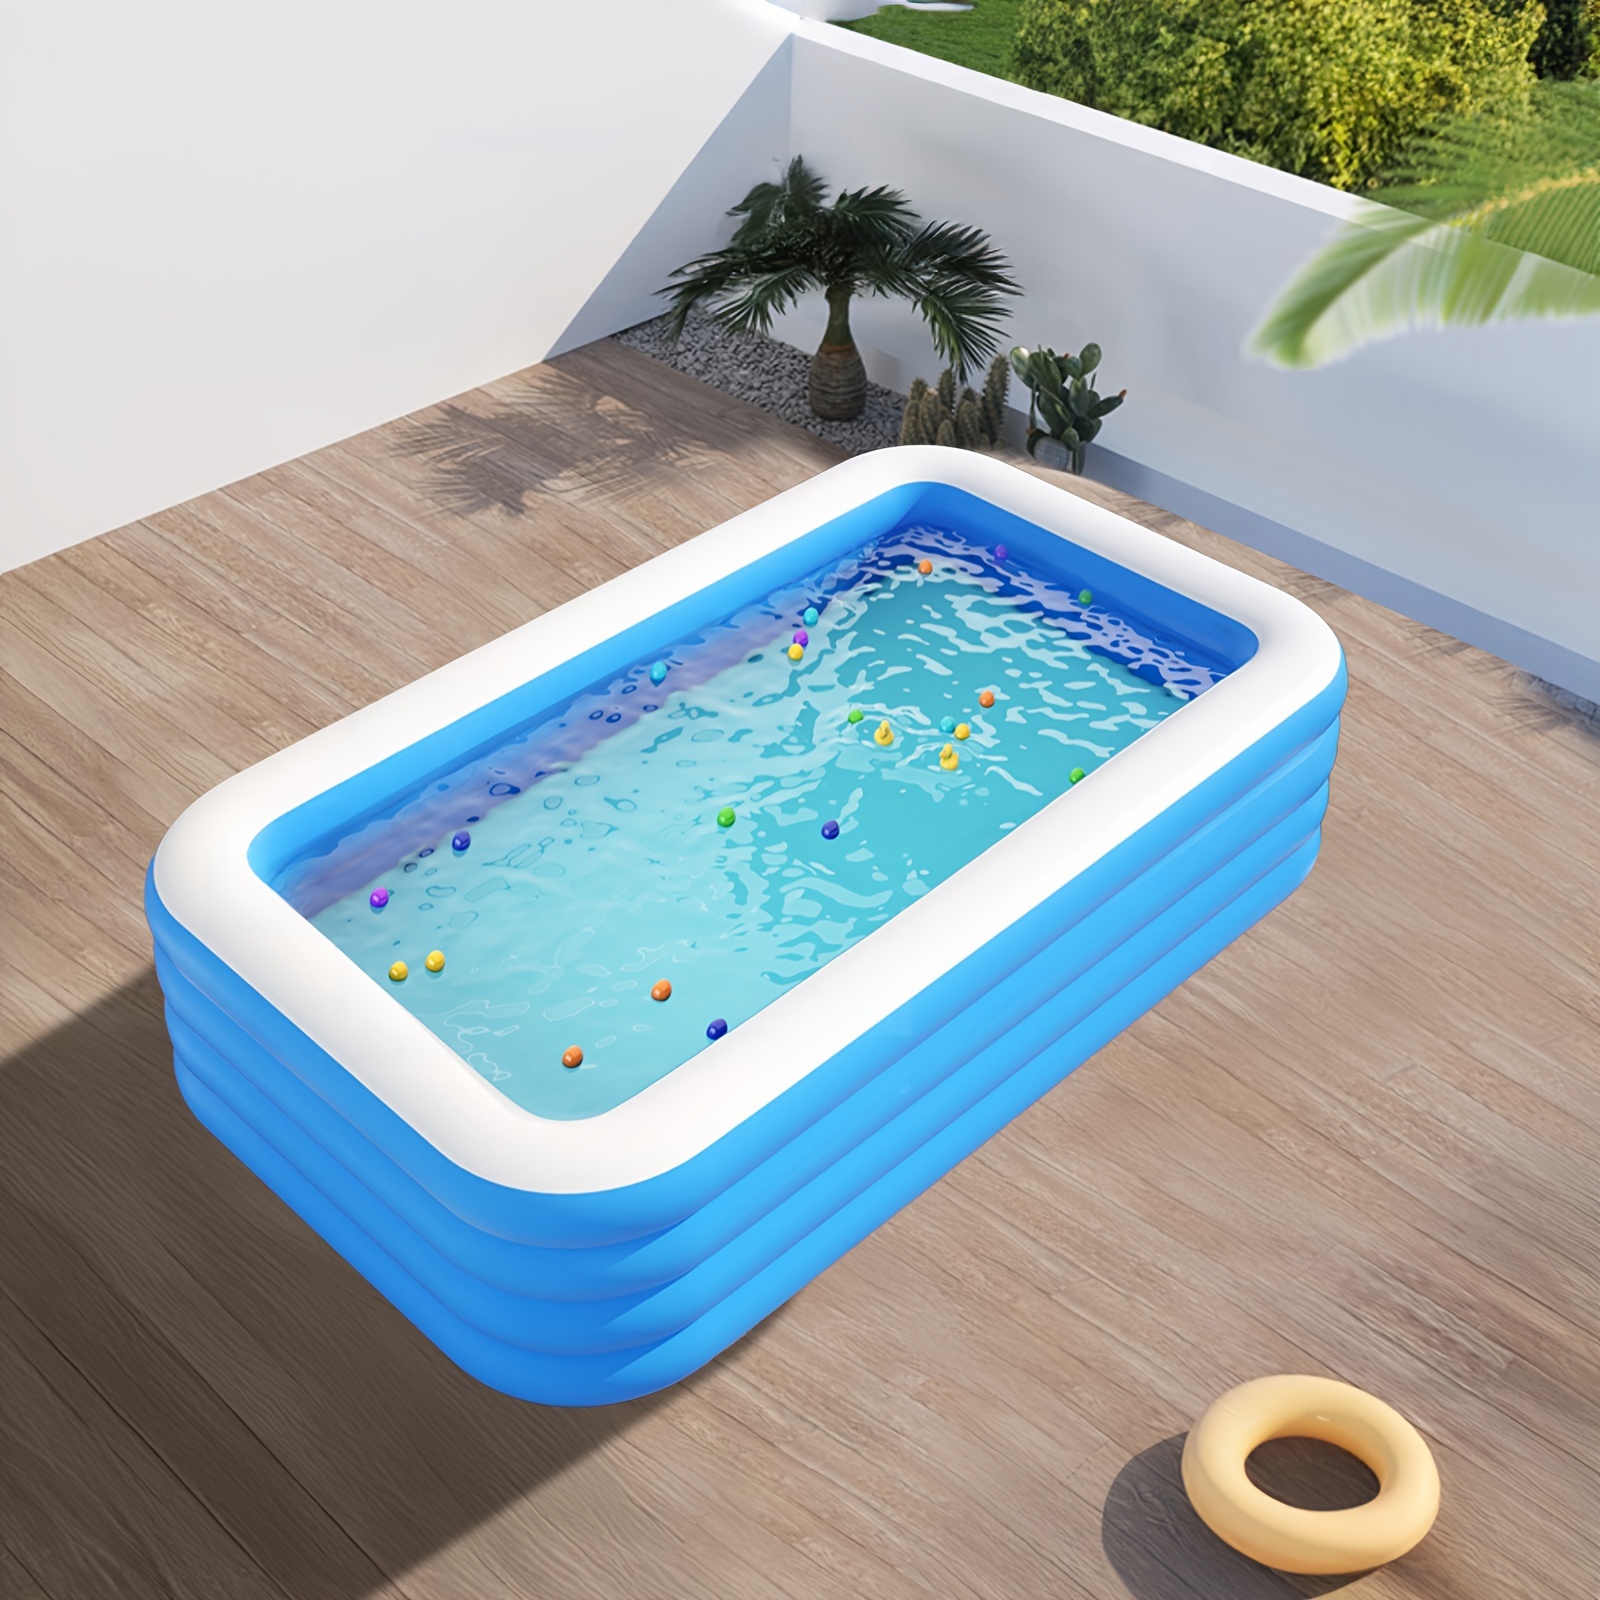 

114"x67"x26" Inflatable Swimming Pool - Full-sized Pool Made Of Durable Pvc, Includes Multiple Accessories, No Electricity Required - Thickened Rectangular Above Ground Pool Package